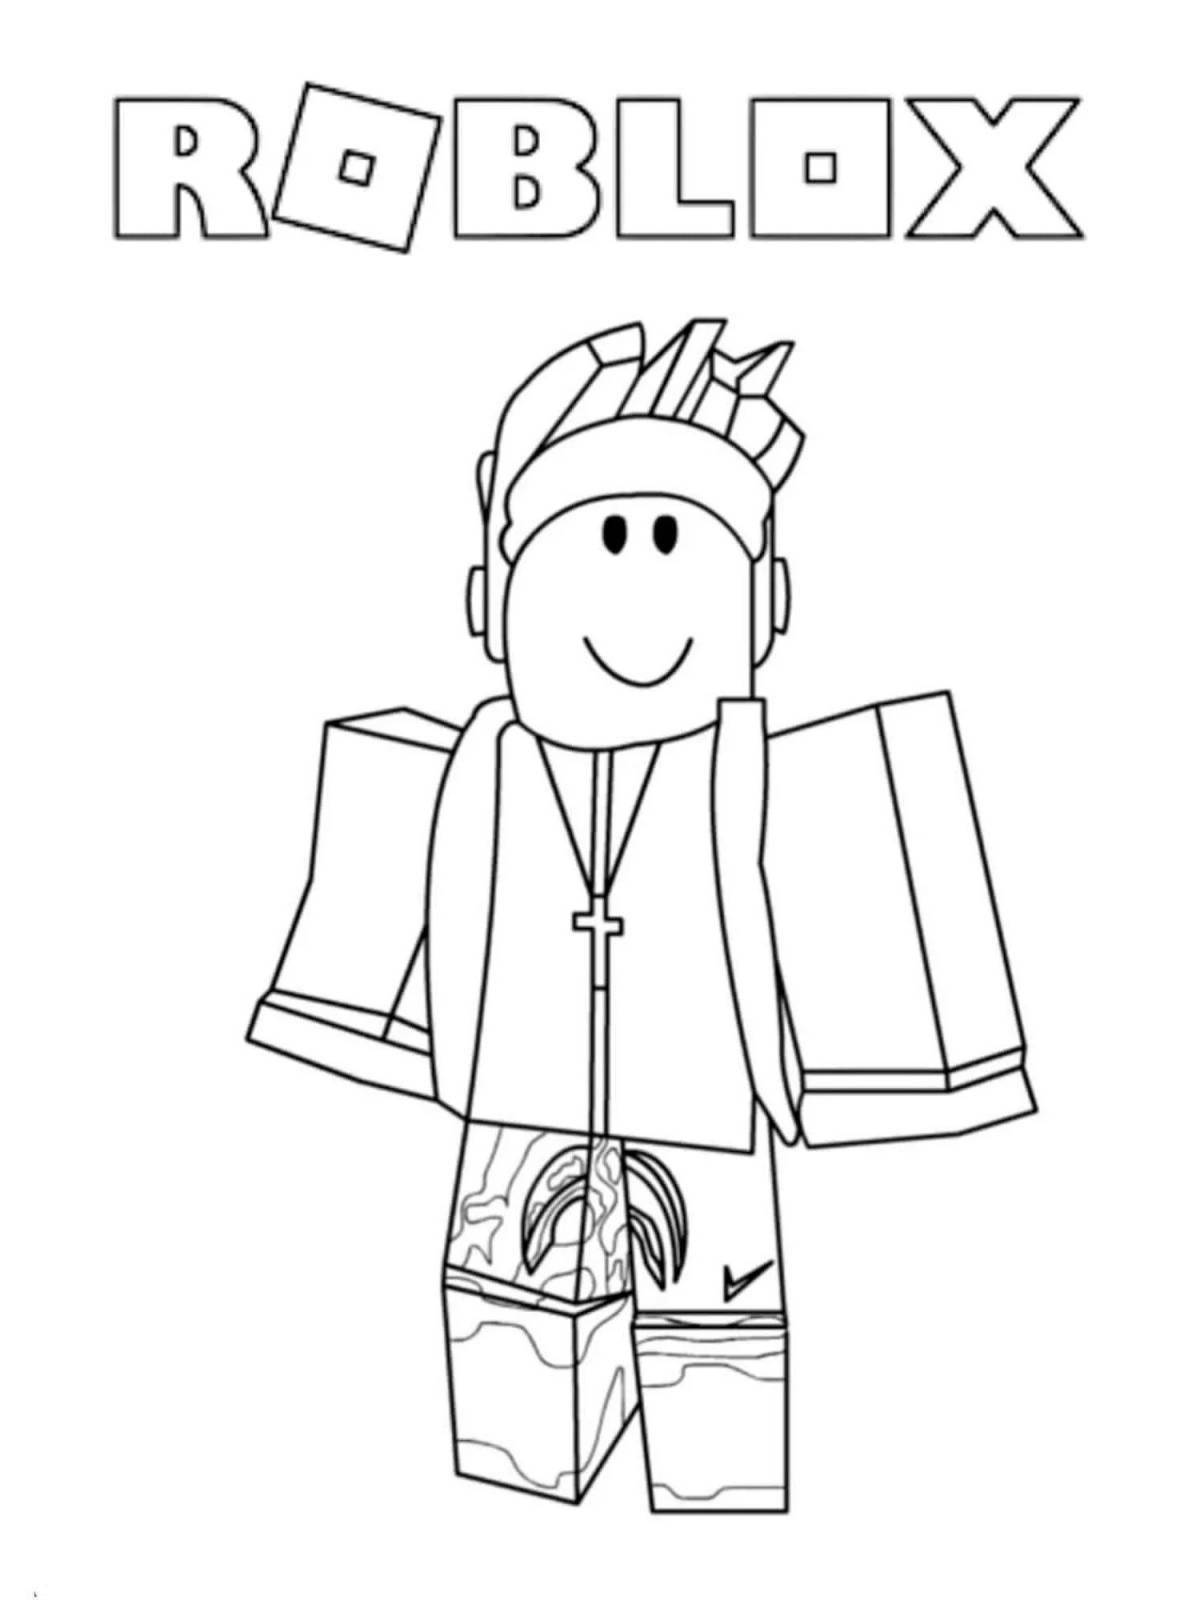 Fancy roblox girl coloring book